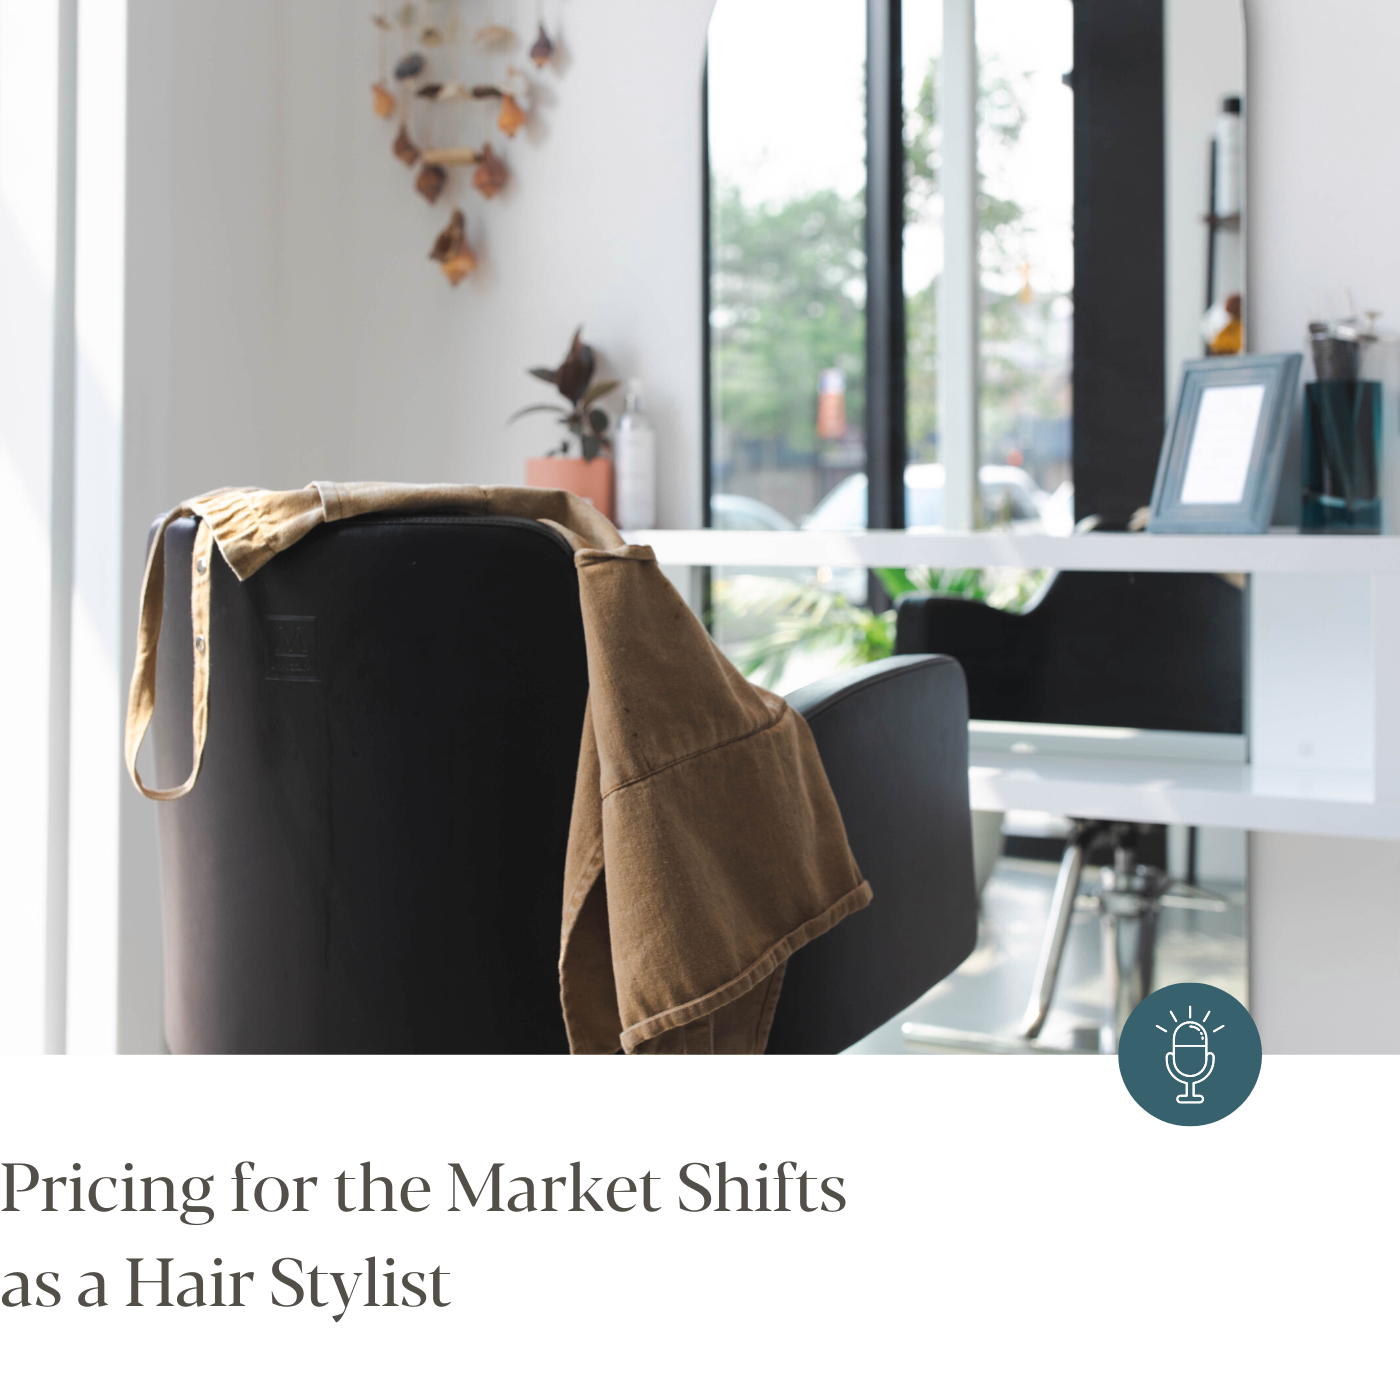 Episode #270 - Pricing for the Market Shifts as a Hair Stylist 